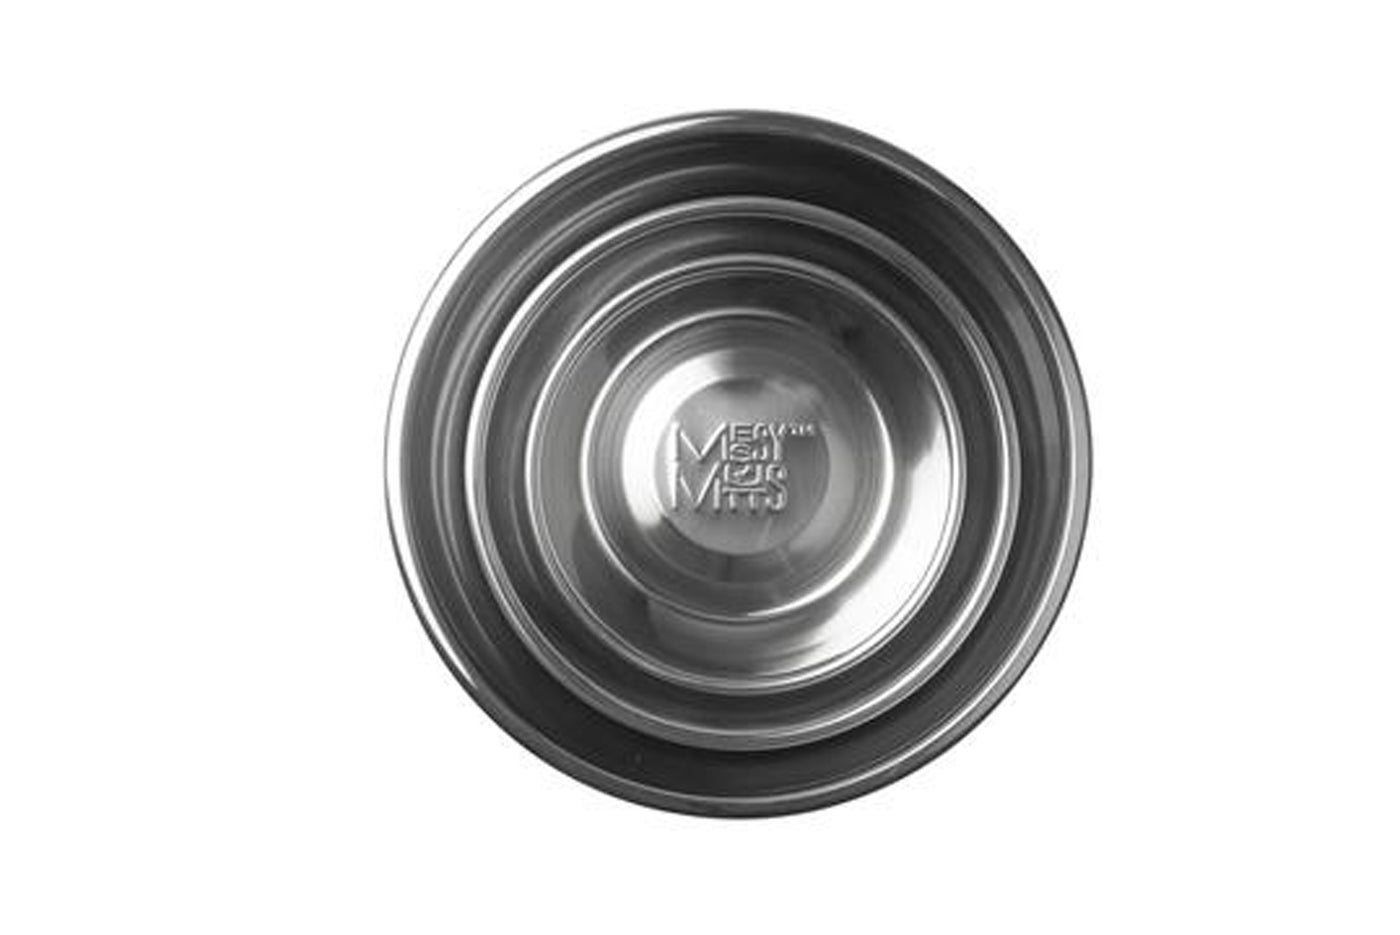 Messy Mutts Dog Bowl Stainless Steel 1.5 Cup